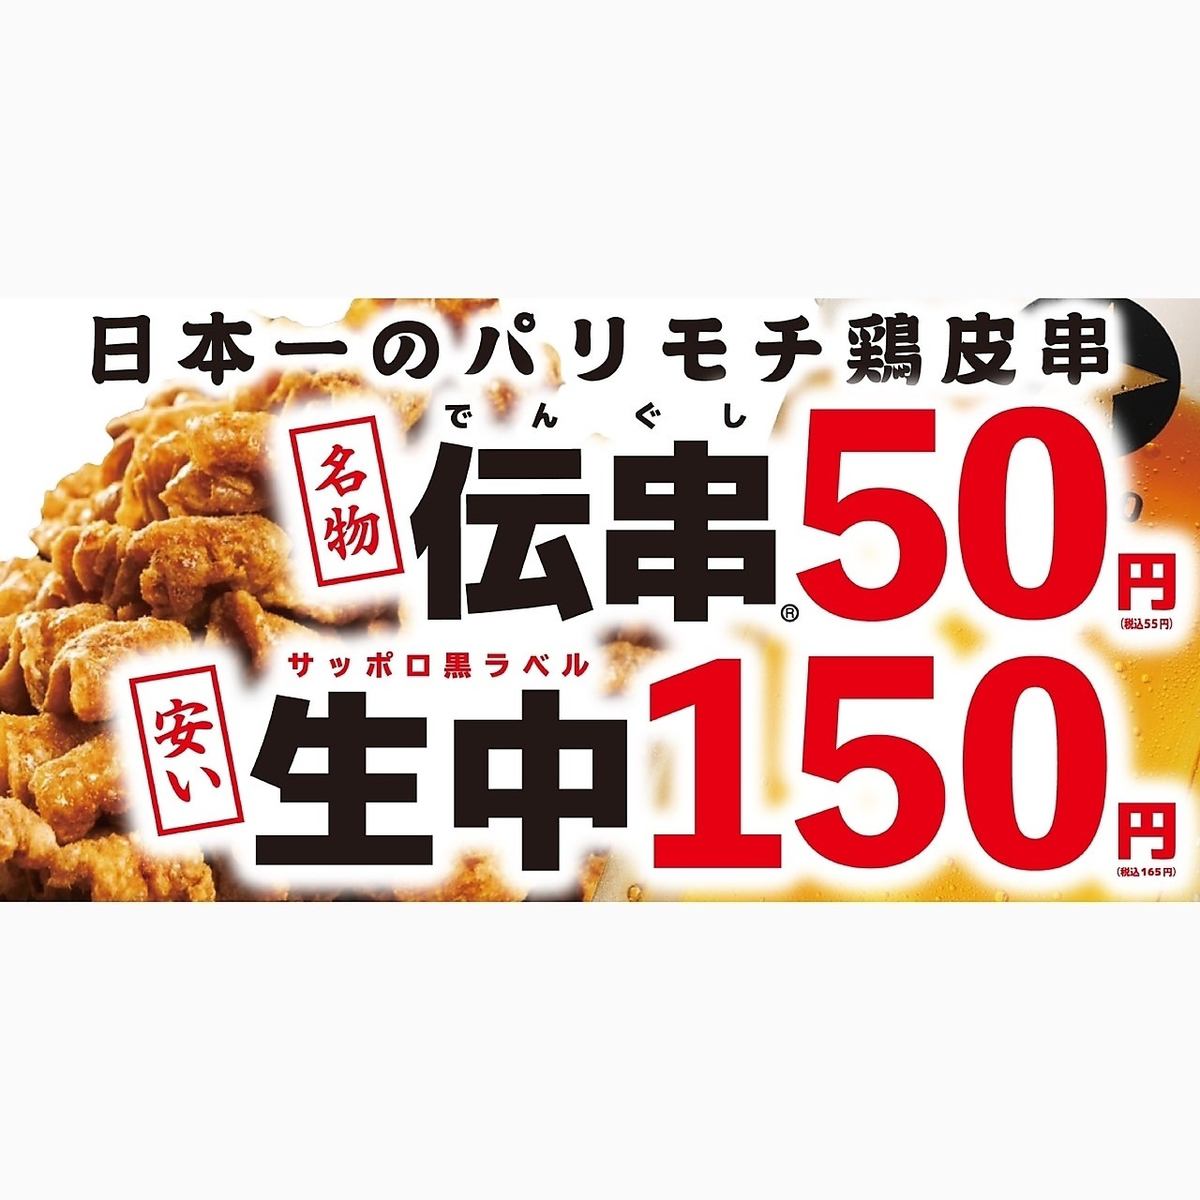 Cheaper than convenience stores! Amazing legendary price! 150 yen (excluding tax) no matter how many highballs you drink